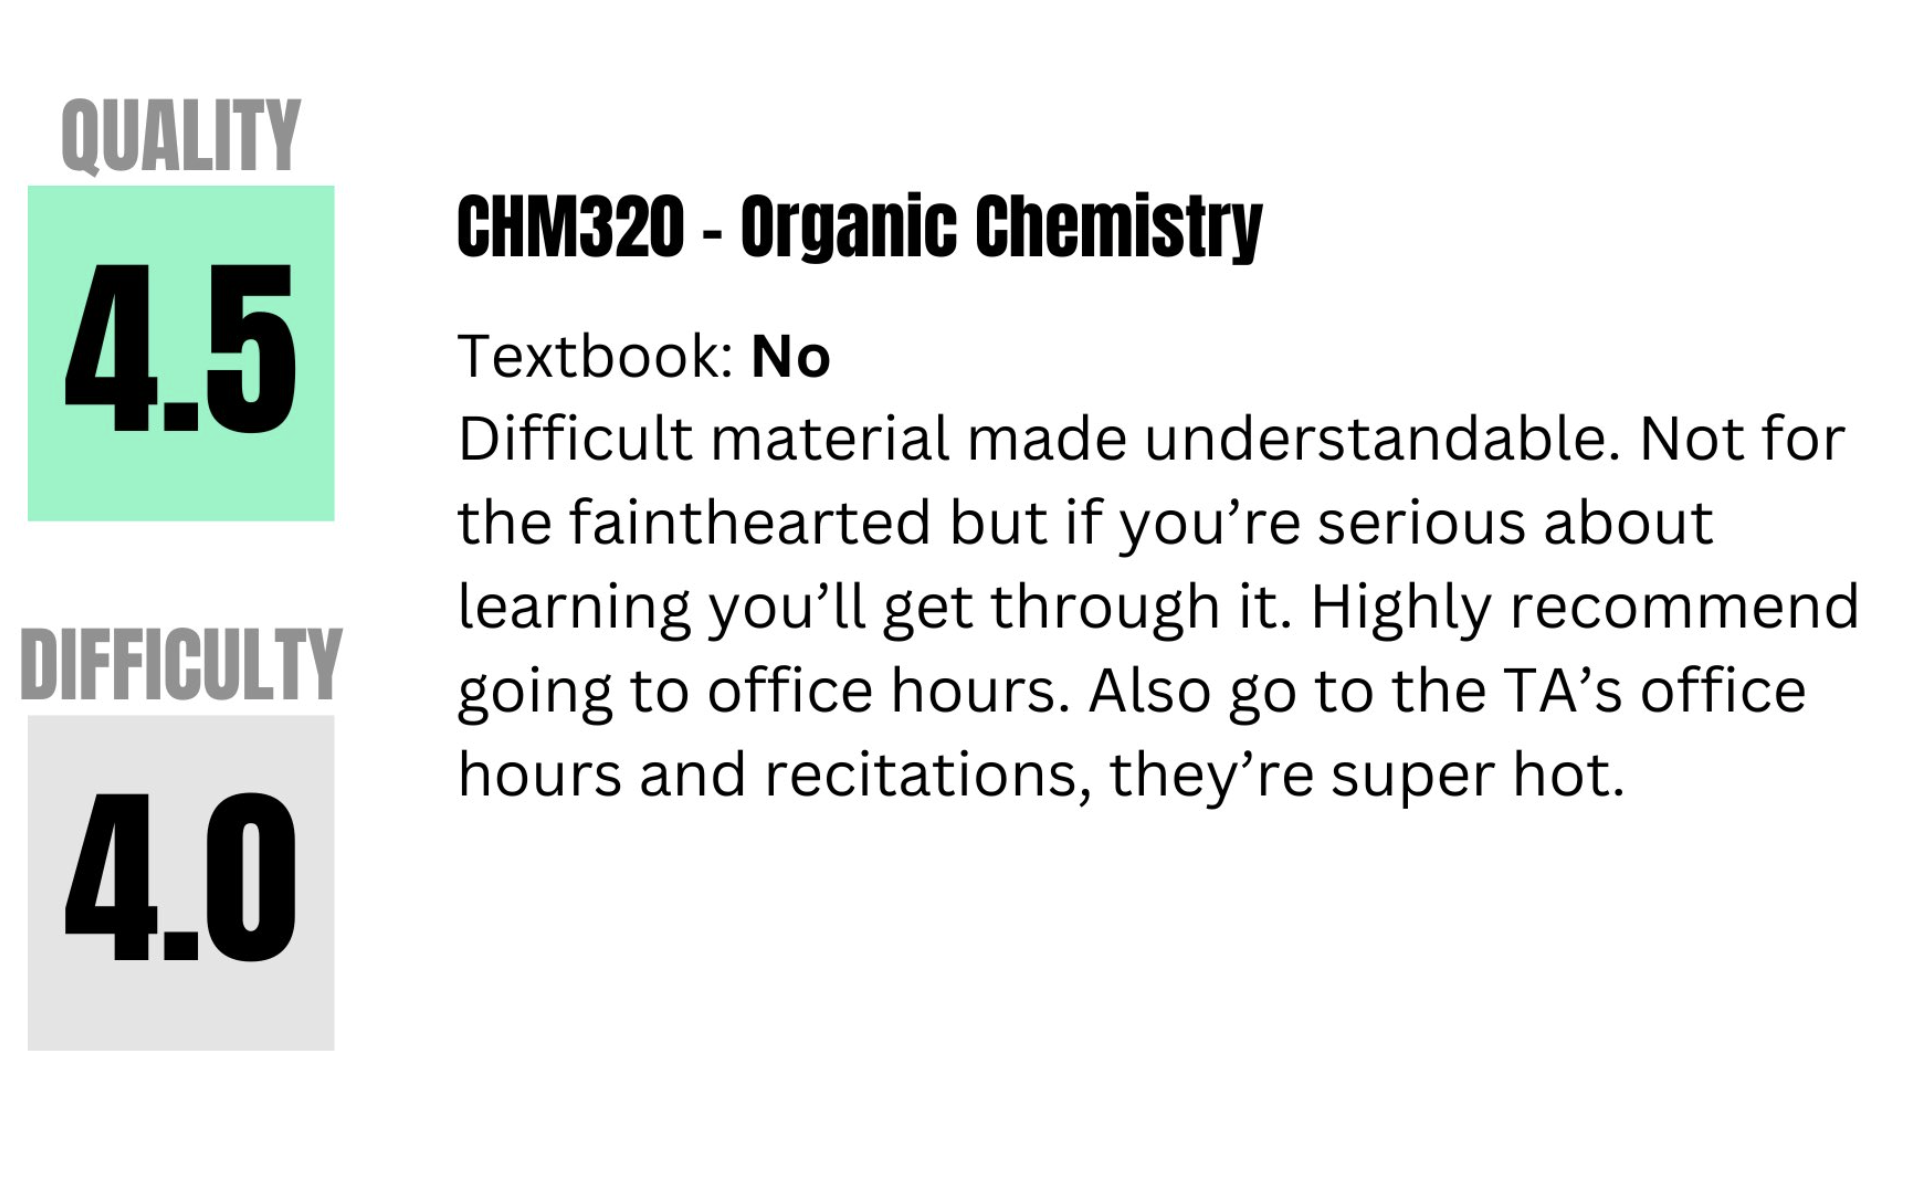 Review card rating a chemistry textbook on quality and difficulty, with a comment suggesting the material is understandable with study and TA interaction